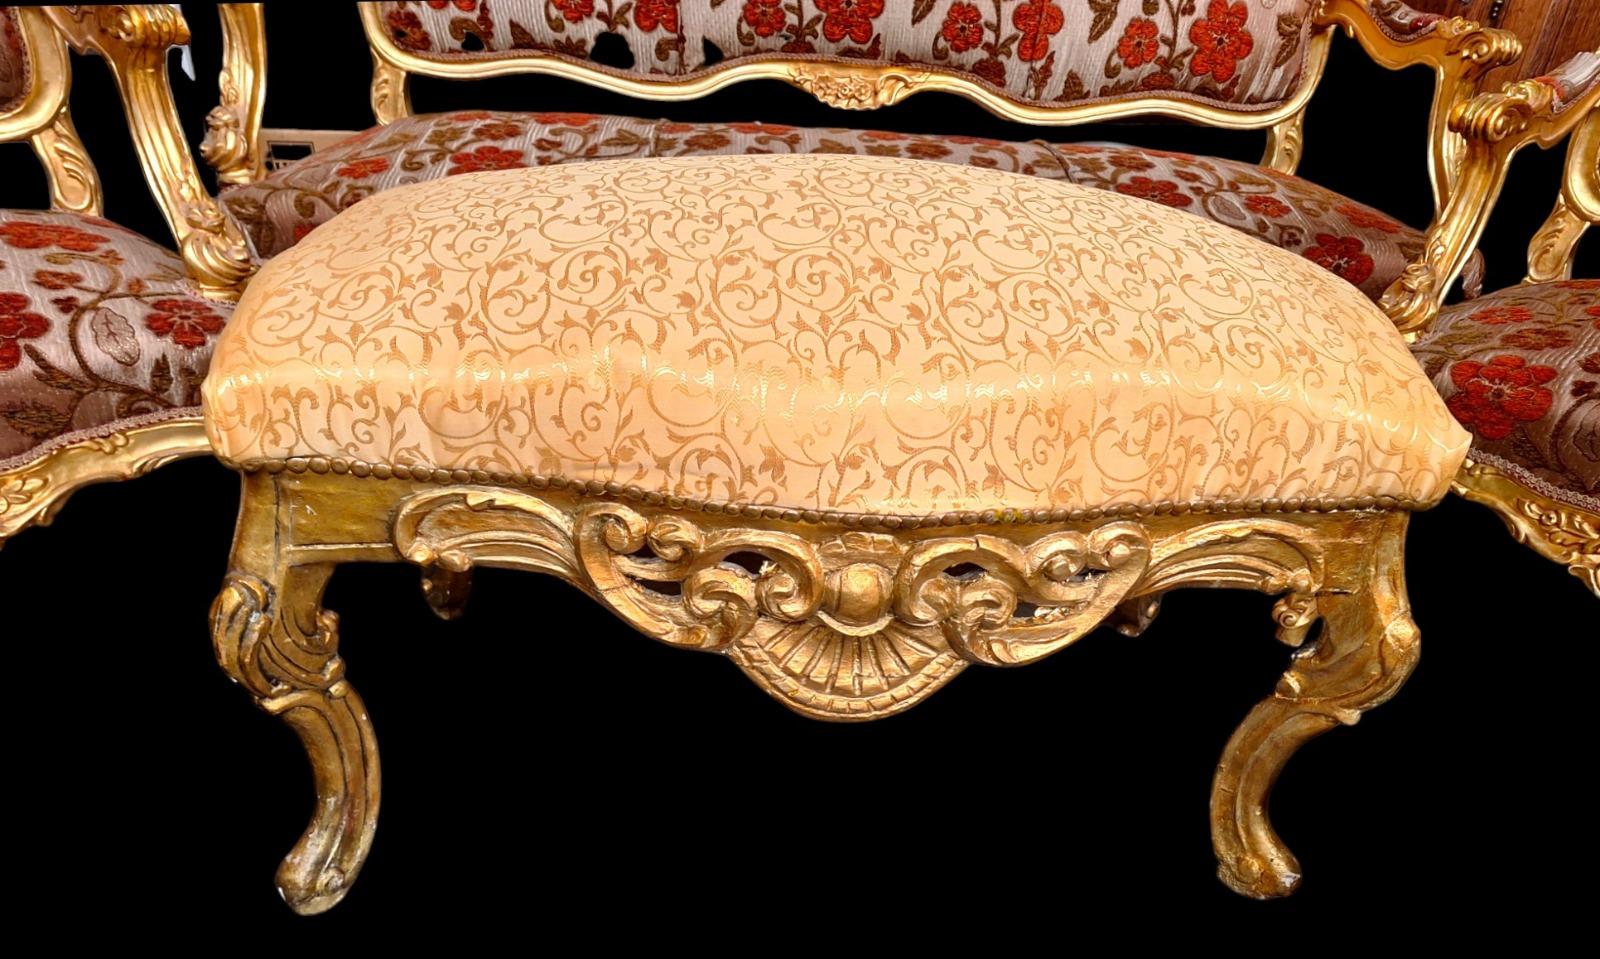 Very decorative sofaset in carved wood and guilded in Louis 15 style